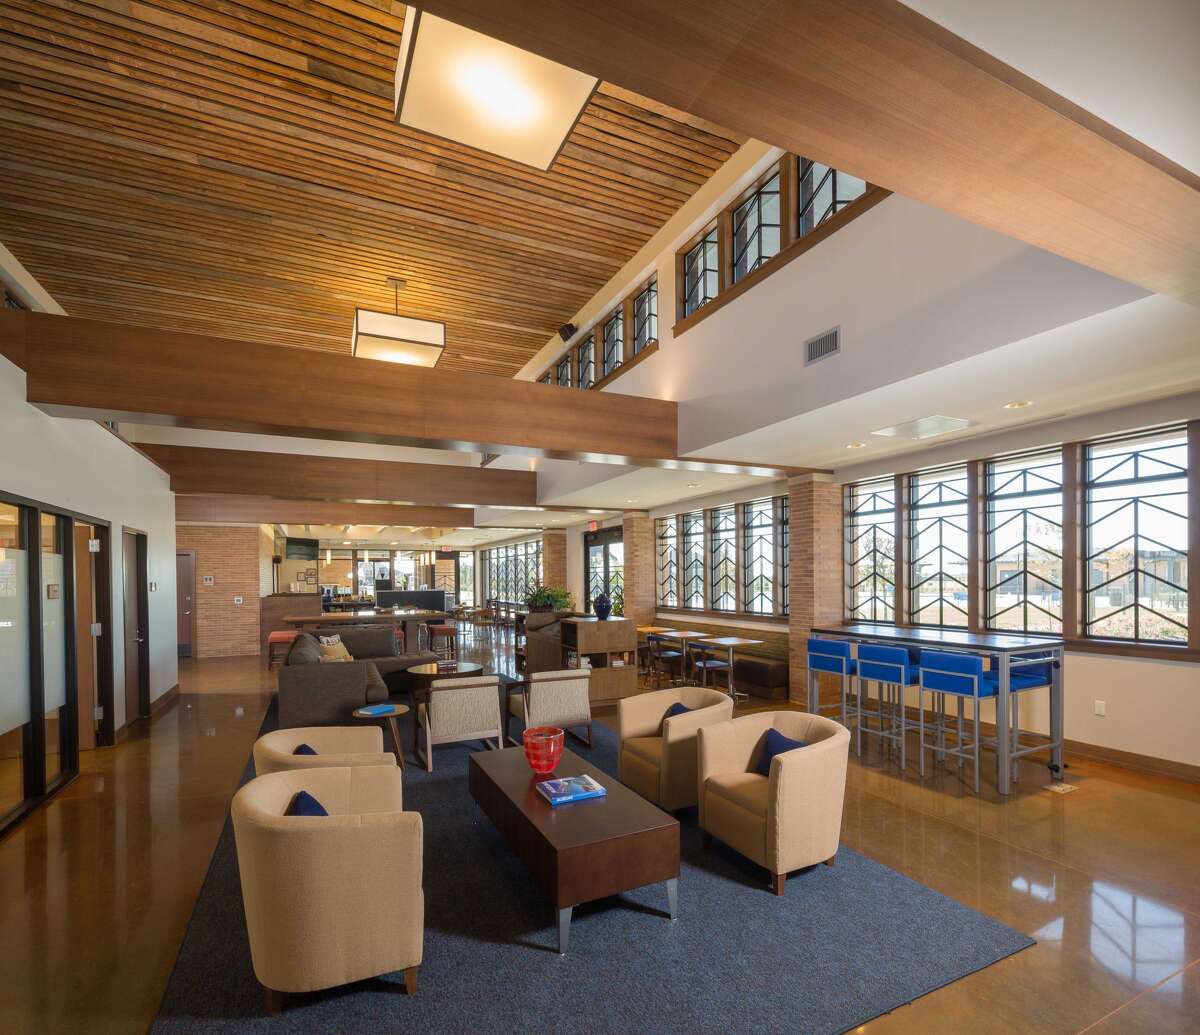 Rorick House, the 9,000-square-foot amenities center at Elyson, has areas for lounging, community meetings and games.